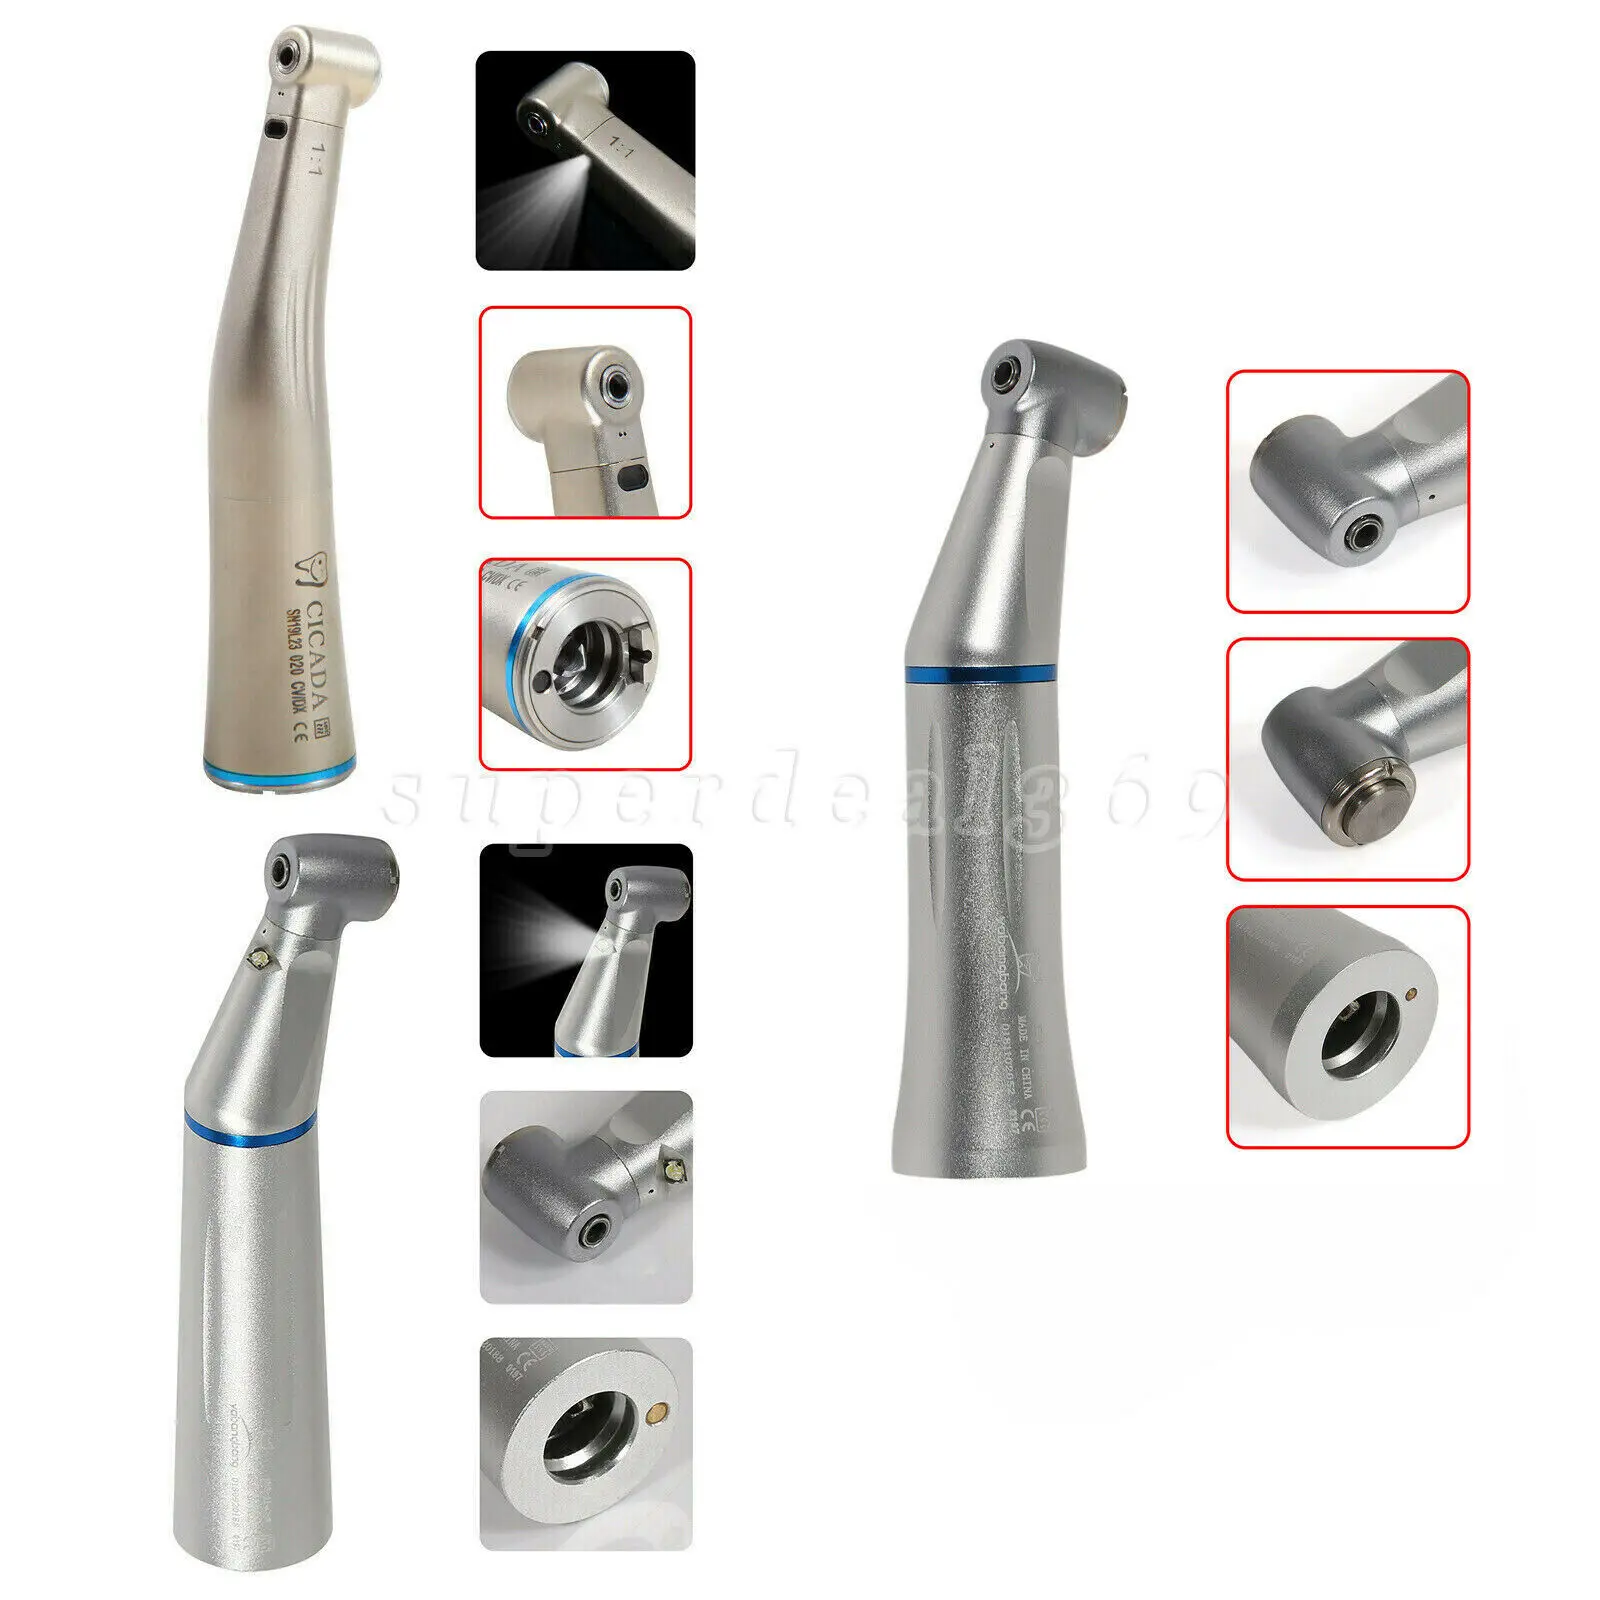 

Dental Contra Angle Slow Low Speed/LED E-generator/Fiber Optic Handpiece Inner Water Spary Fit NSK Kavo